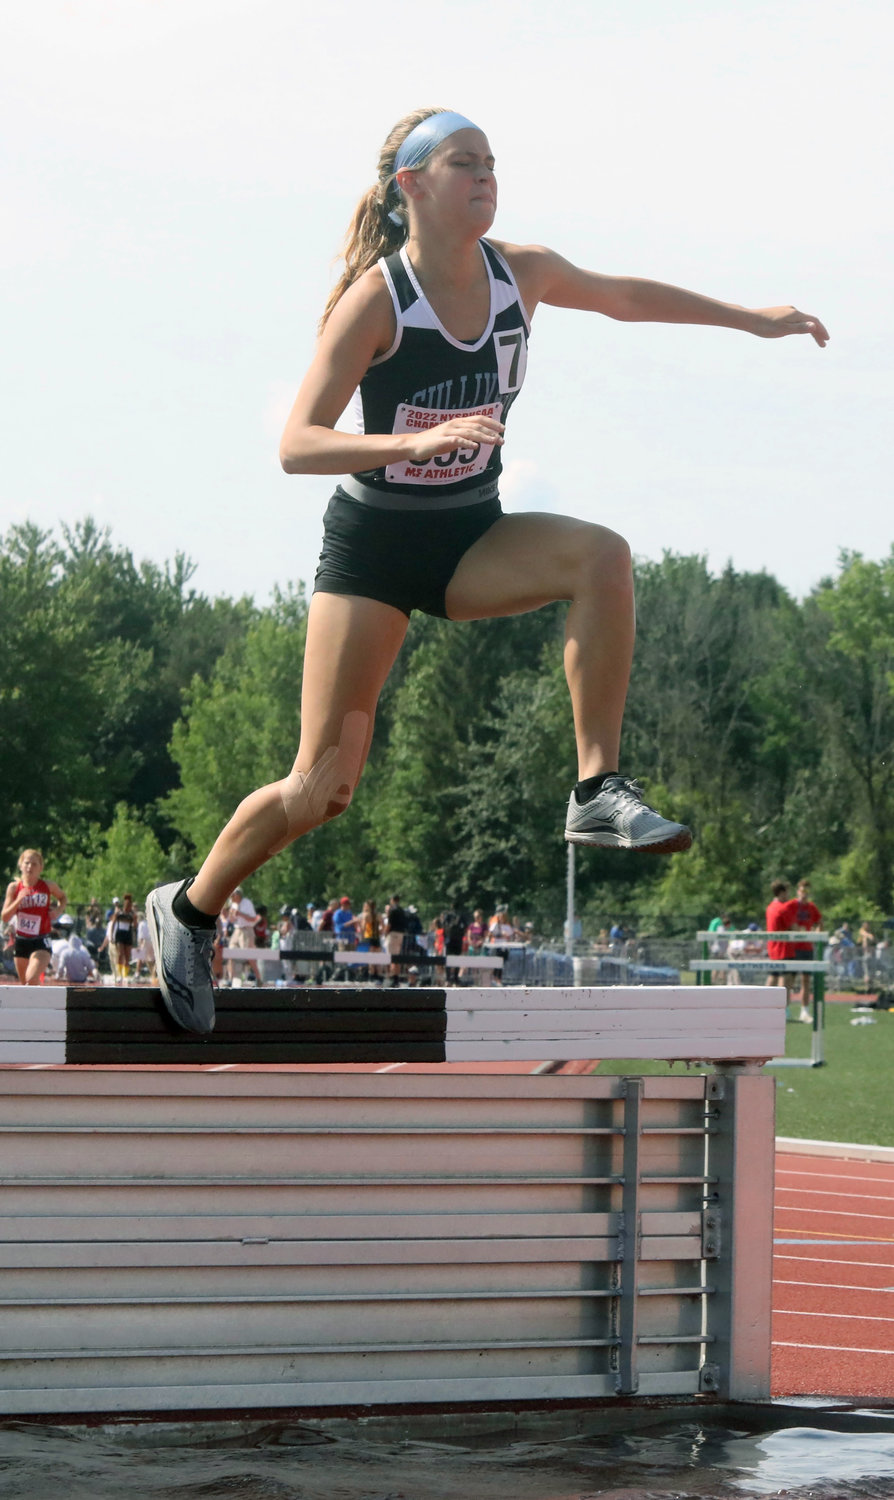 Sullivan West’s Grace Boyd broke three school records this spring including in the steeplechase, along with the 3000 and 1500. Though she didn’t medal at states, suffering knee pain she persevered right on through and set a new PR in the steeplechase and new school record with her time of 7:45.18. She finished 9th among D2 contenders. She also competed in the 3000 the day before on the meet’s opening afternoon.